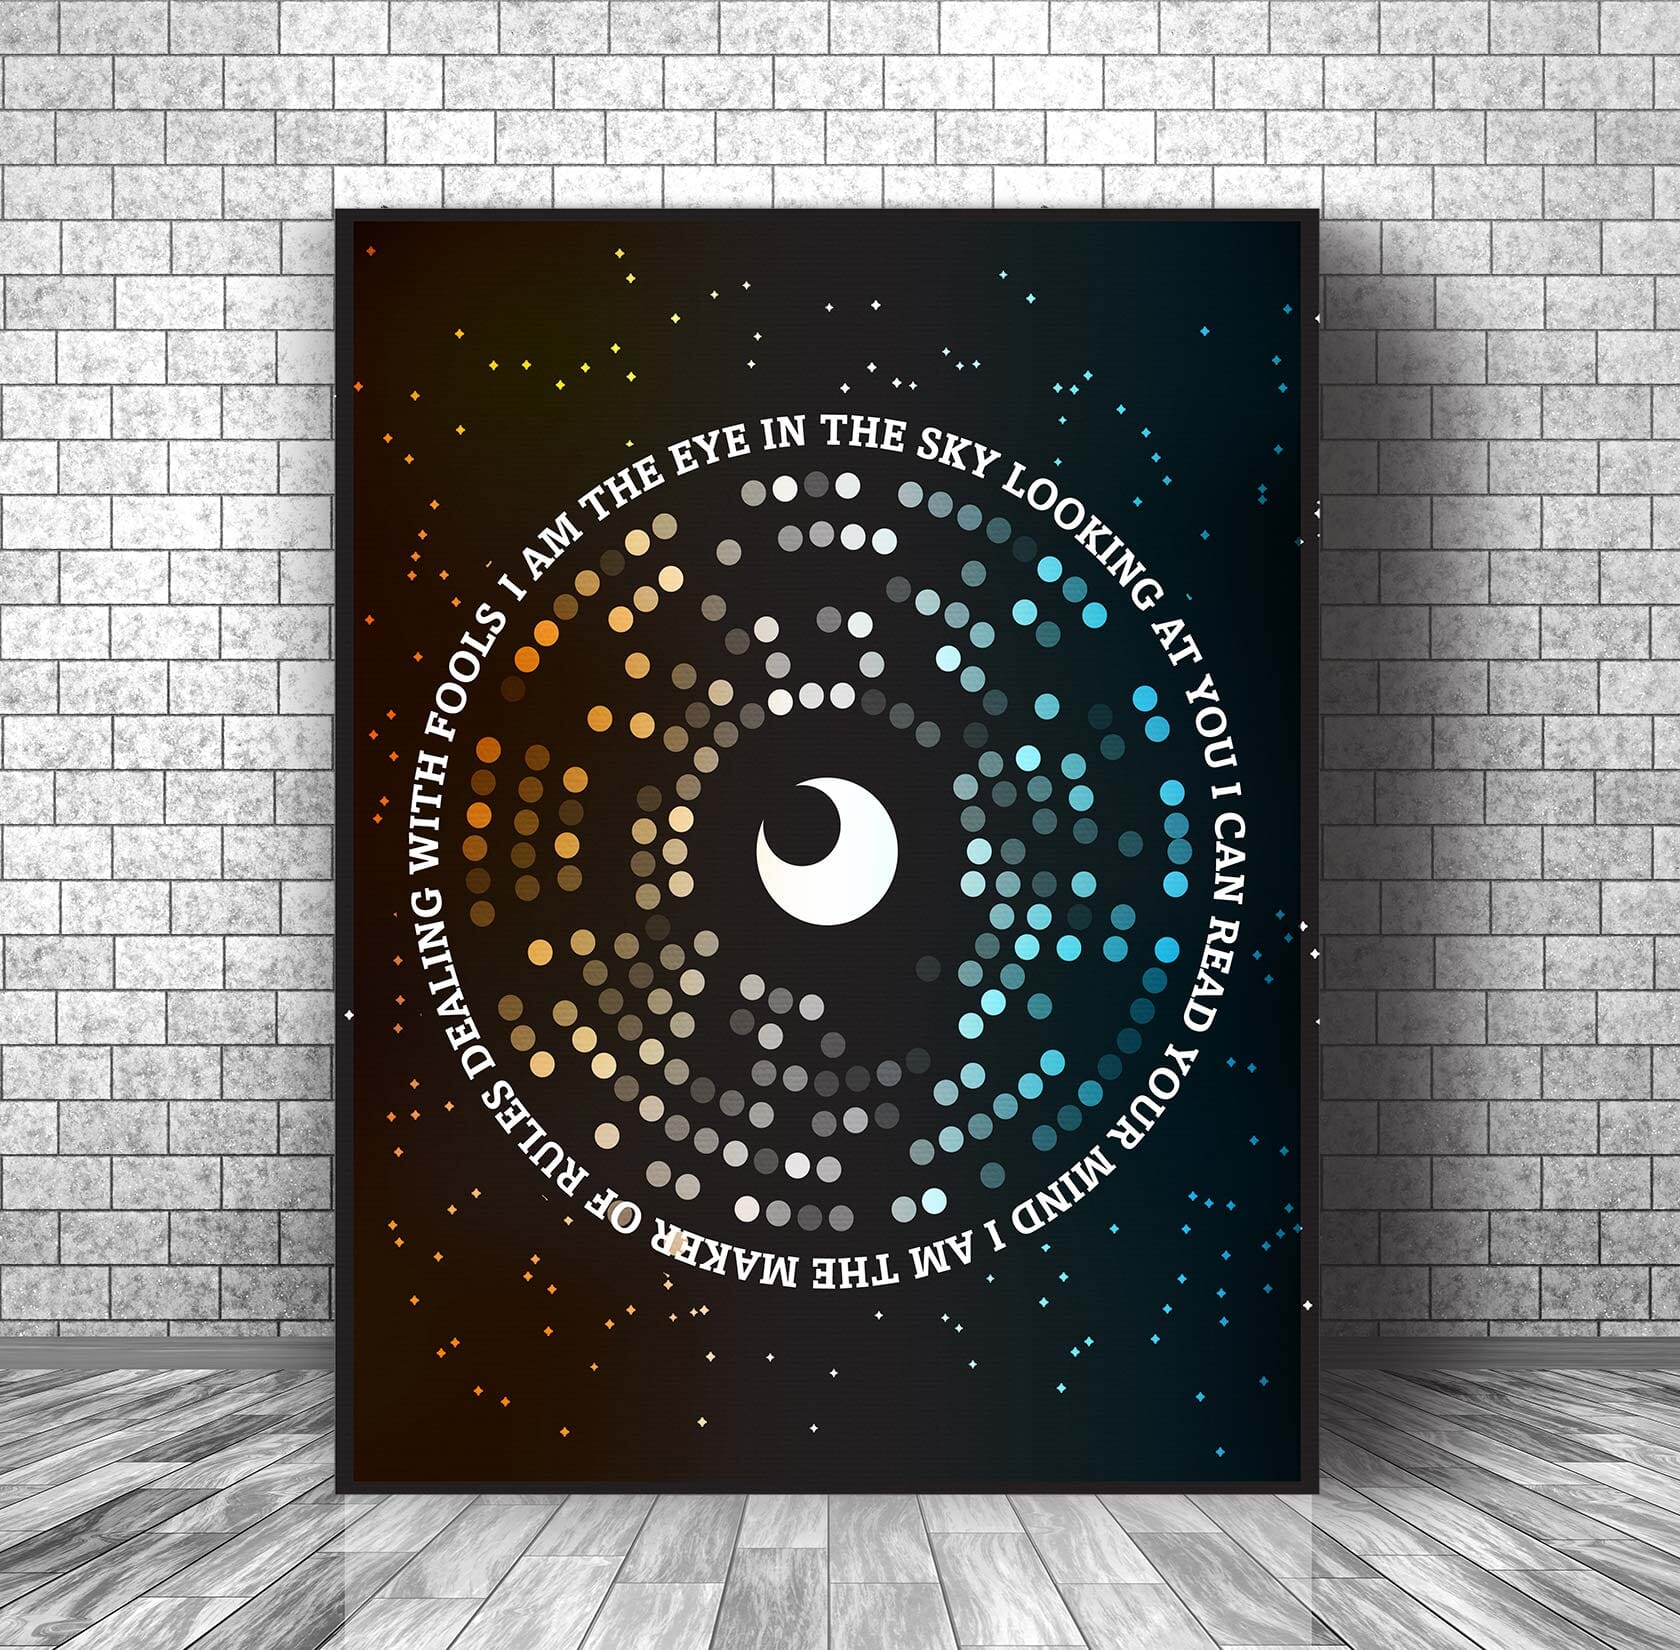 Eye in the Sky by Alan Parsons Project - 80s Song Lyric Art Song Lyrics Art Song Lyrics Art 11x14 Canvas Wrap 